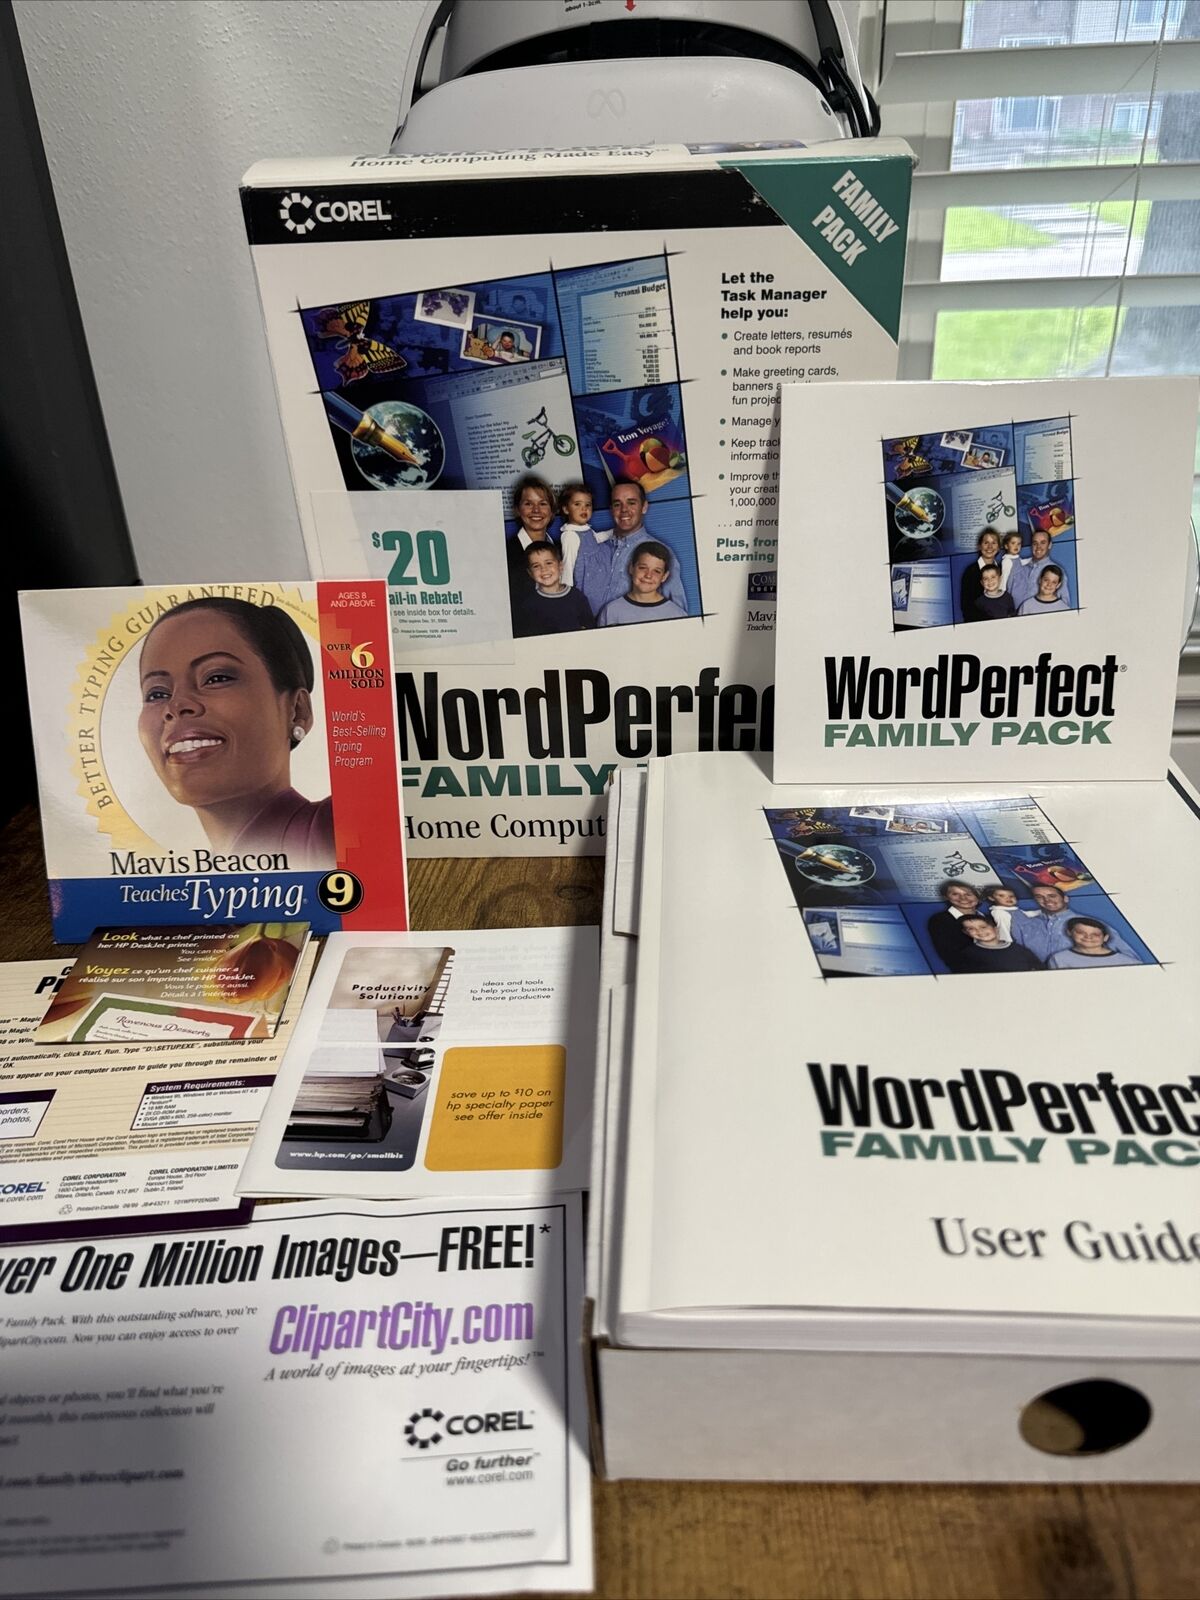 Vintage Software Corel WordPerfect Family Pack for Windows 95, 98, and NT 4.0